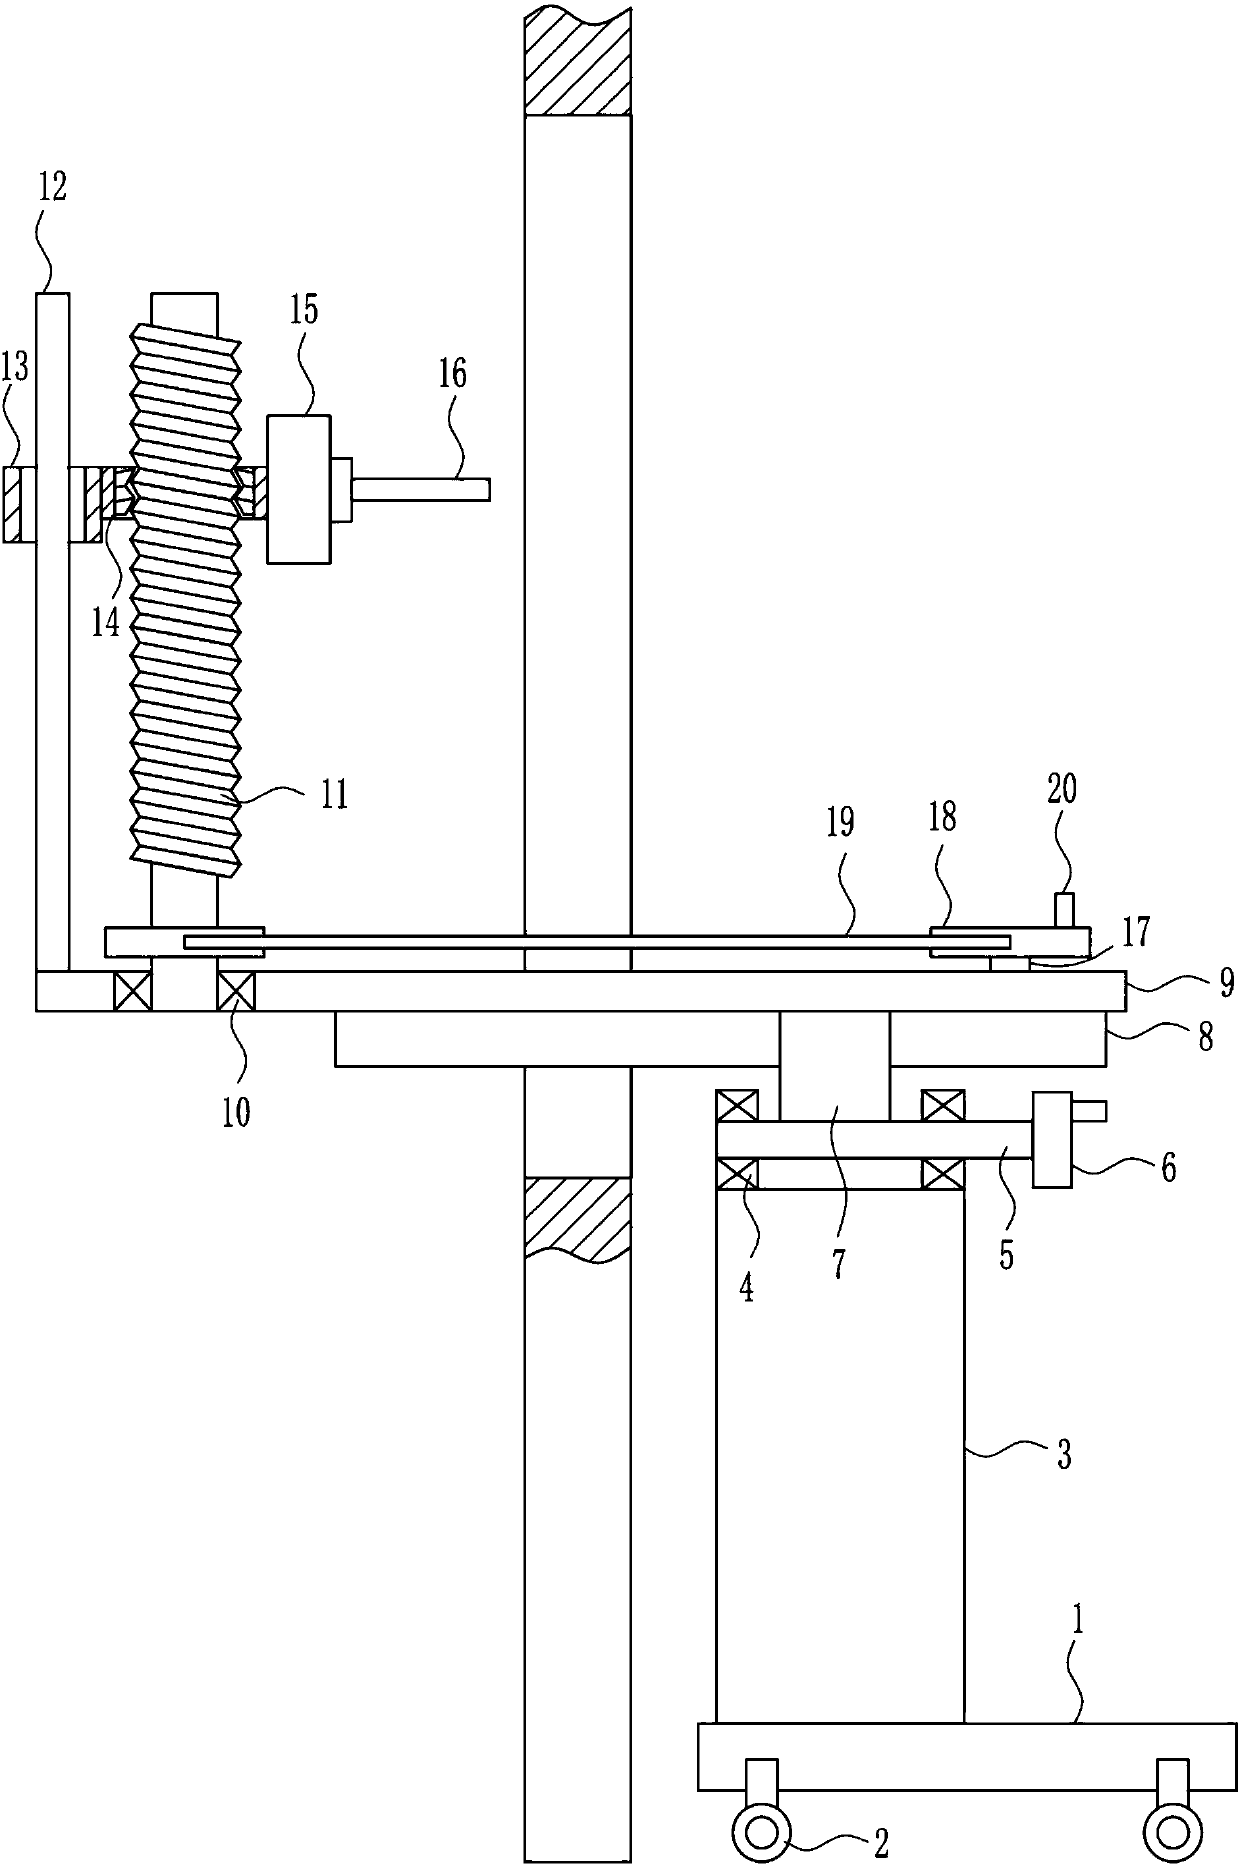 Drilling equipment for mounting wall-mounted solar water heater